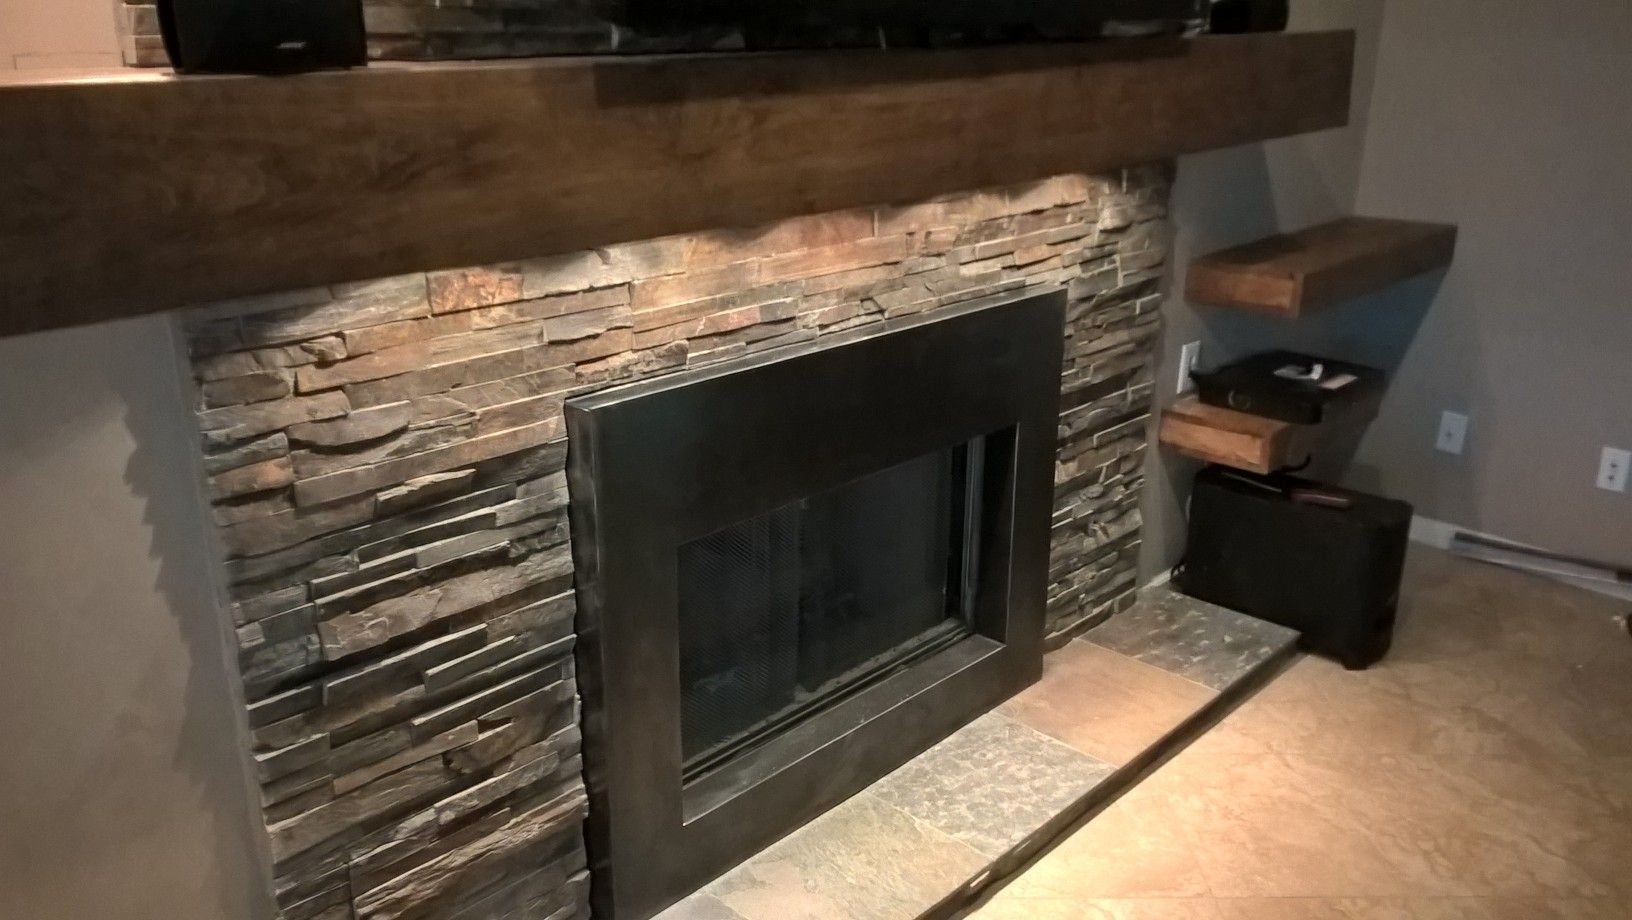 Fireplace Store Las Vegas Luxury the Metal Fireplace Surround Was Created to Help Give the